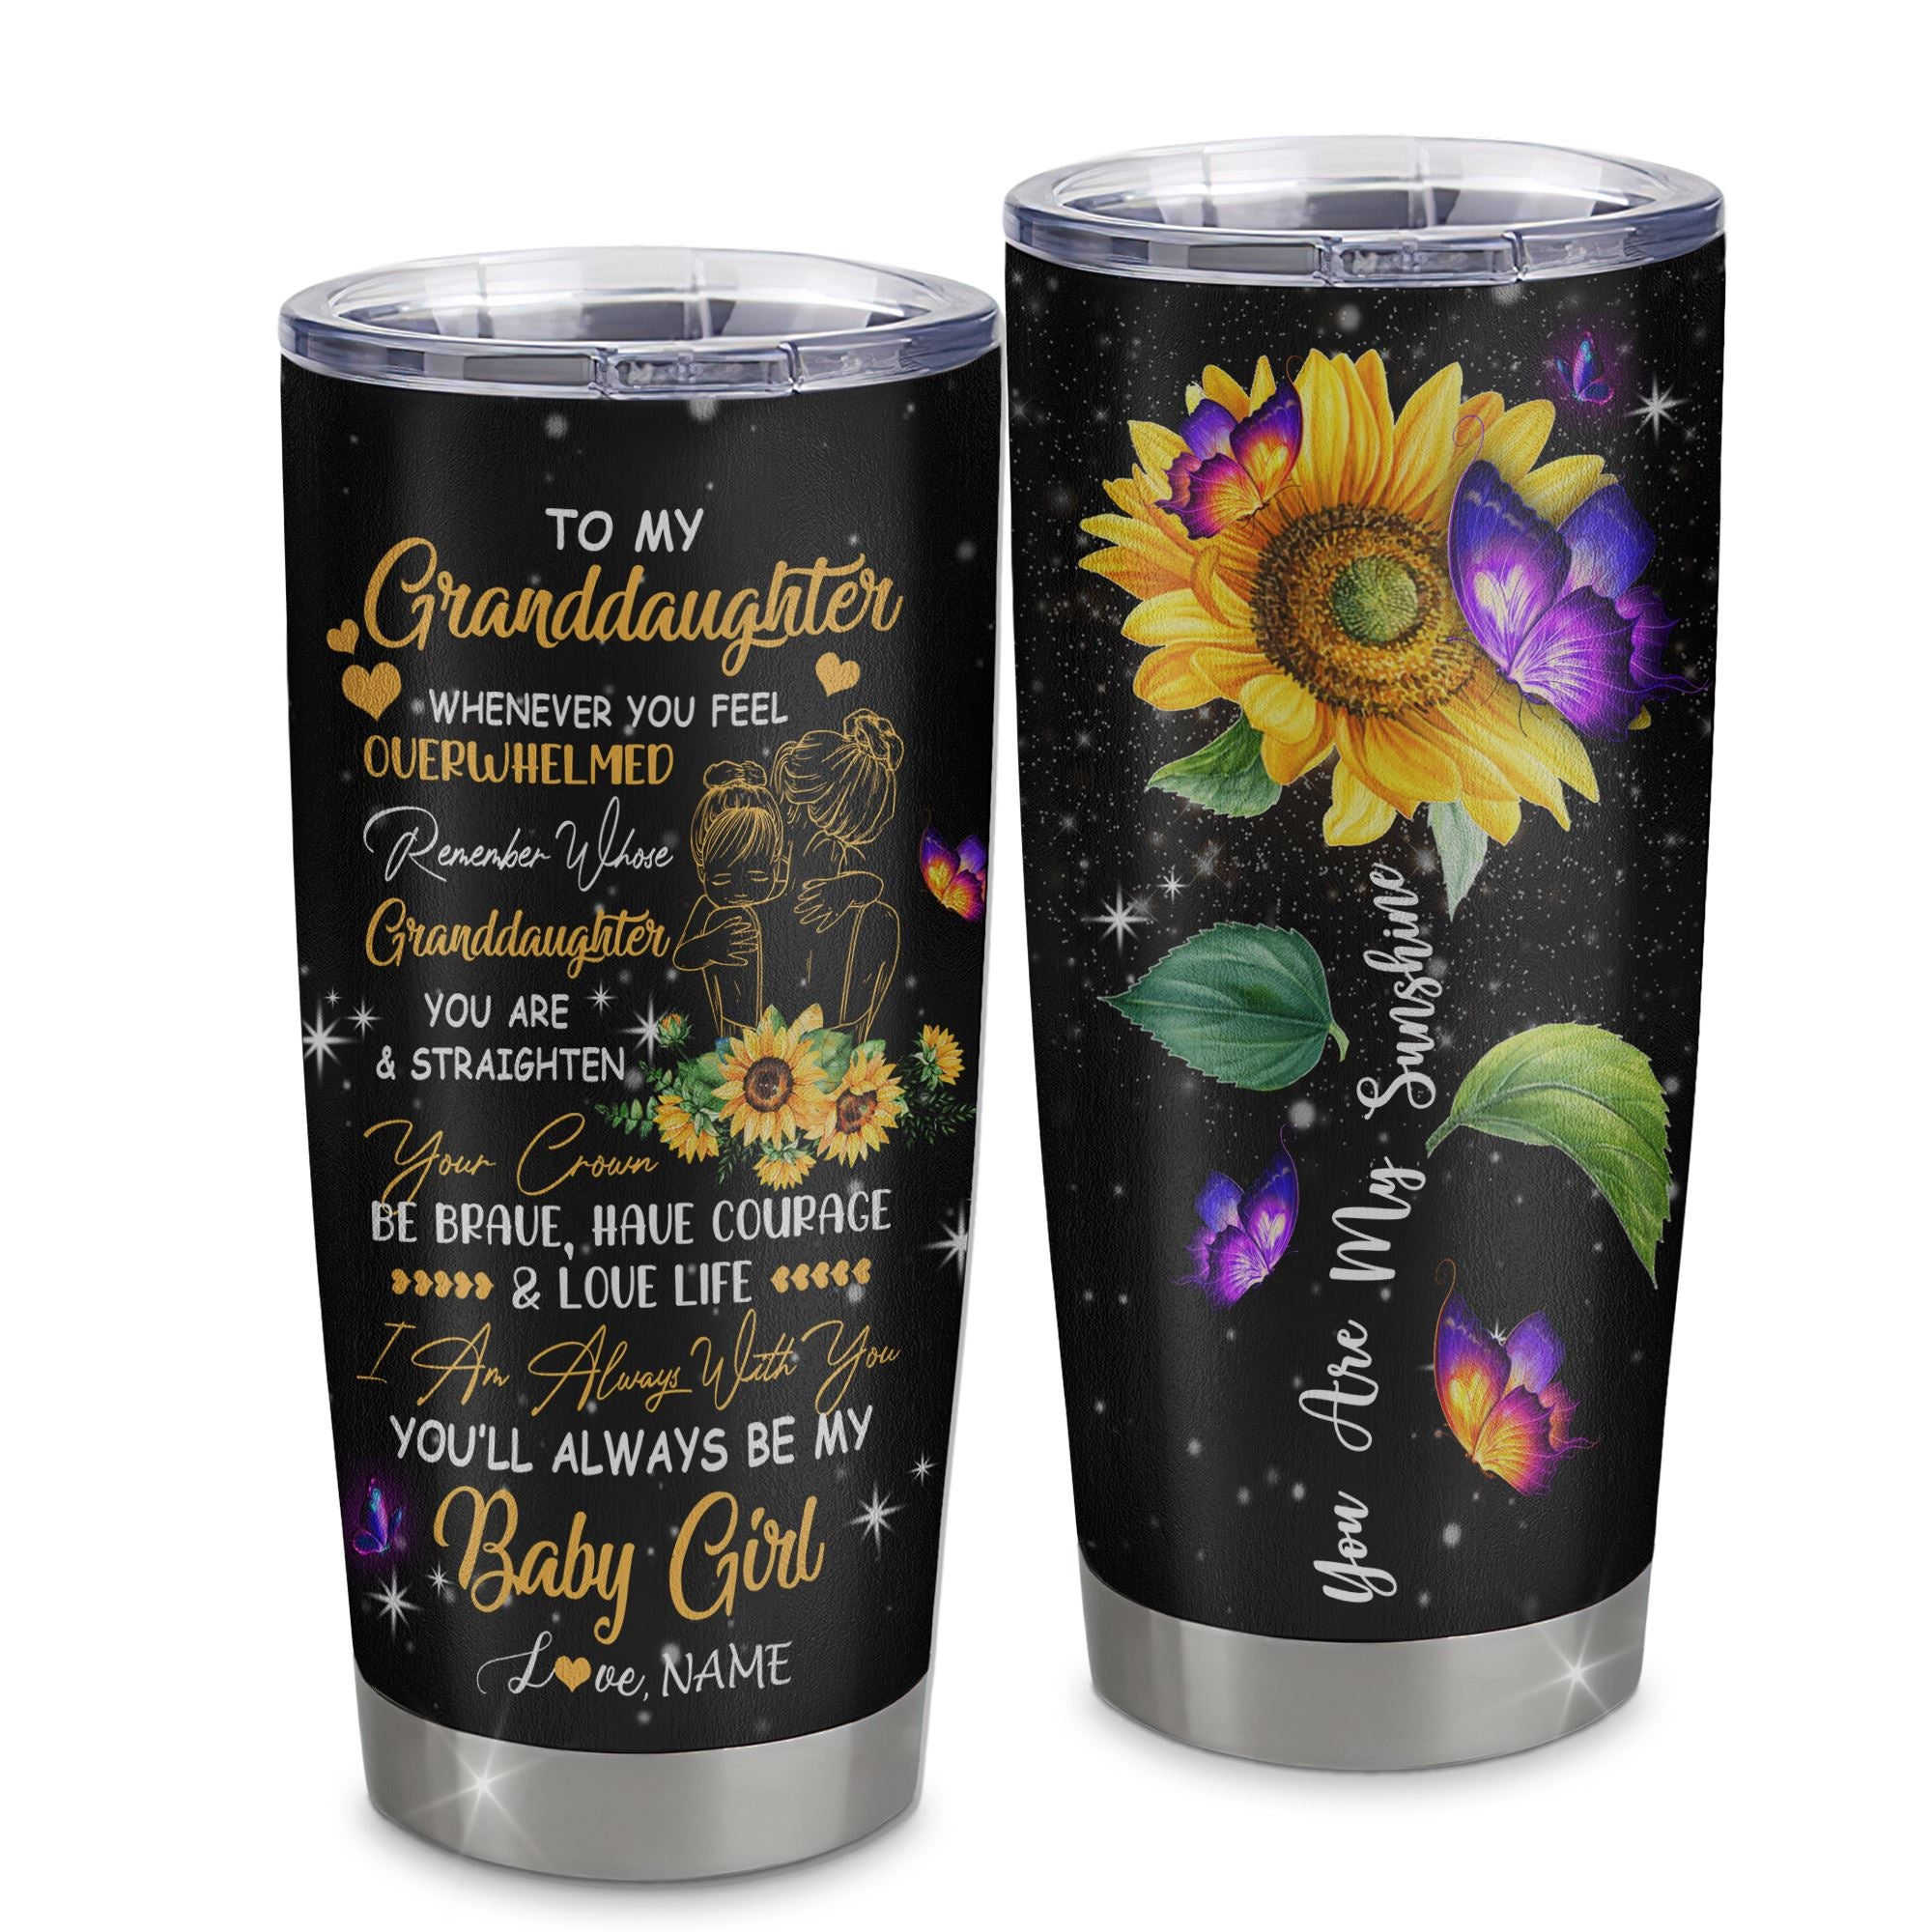 Personalized_To_My_Granddaughter_From_Grandma_Stainless_Steel_Tumbler_Cup_You_Are_My_Sunshine_Sunflower_Butterfly_Granddaughter_Birthday_Graduation_Christmas_Travel_Mug_Tumbler_mockup-1.jpg